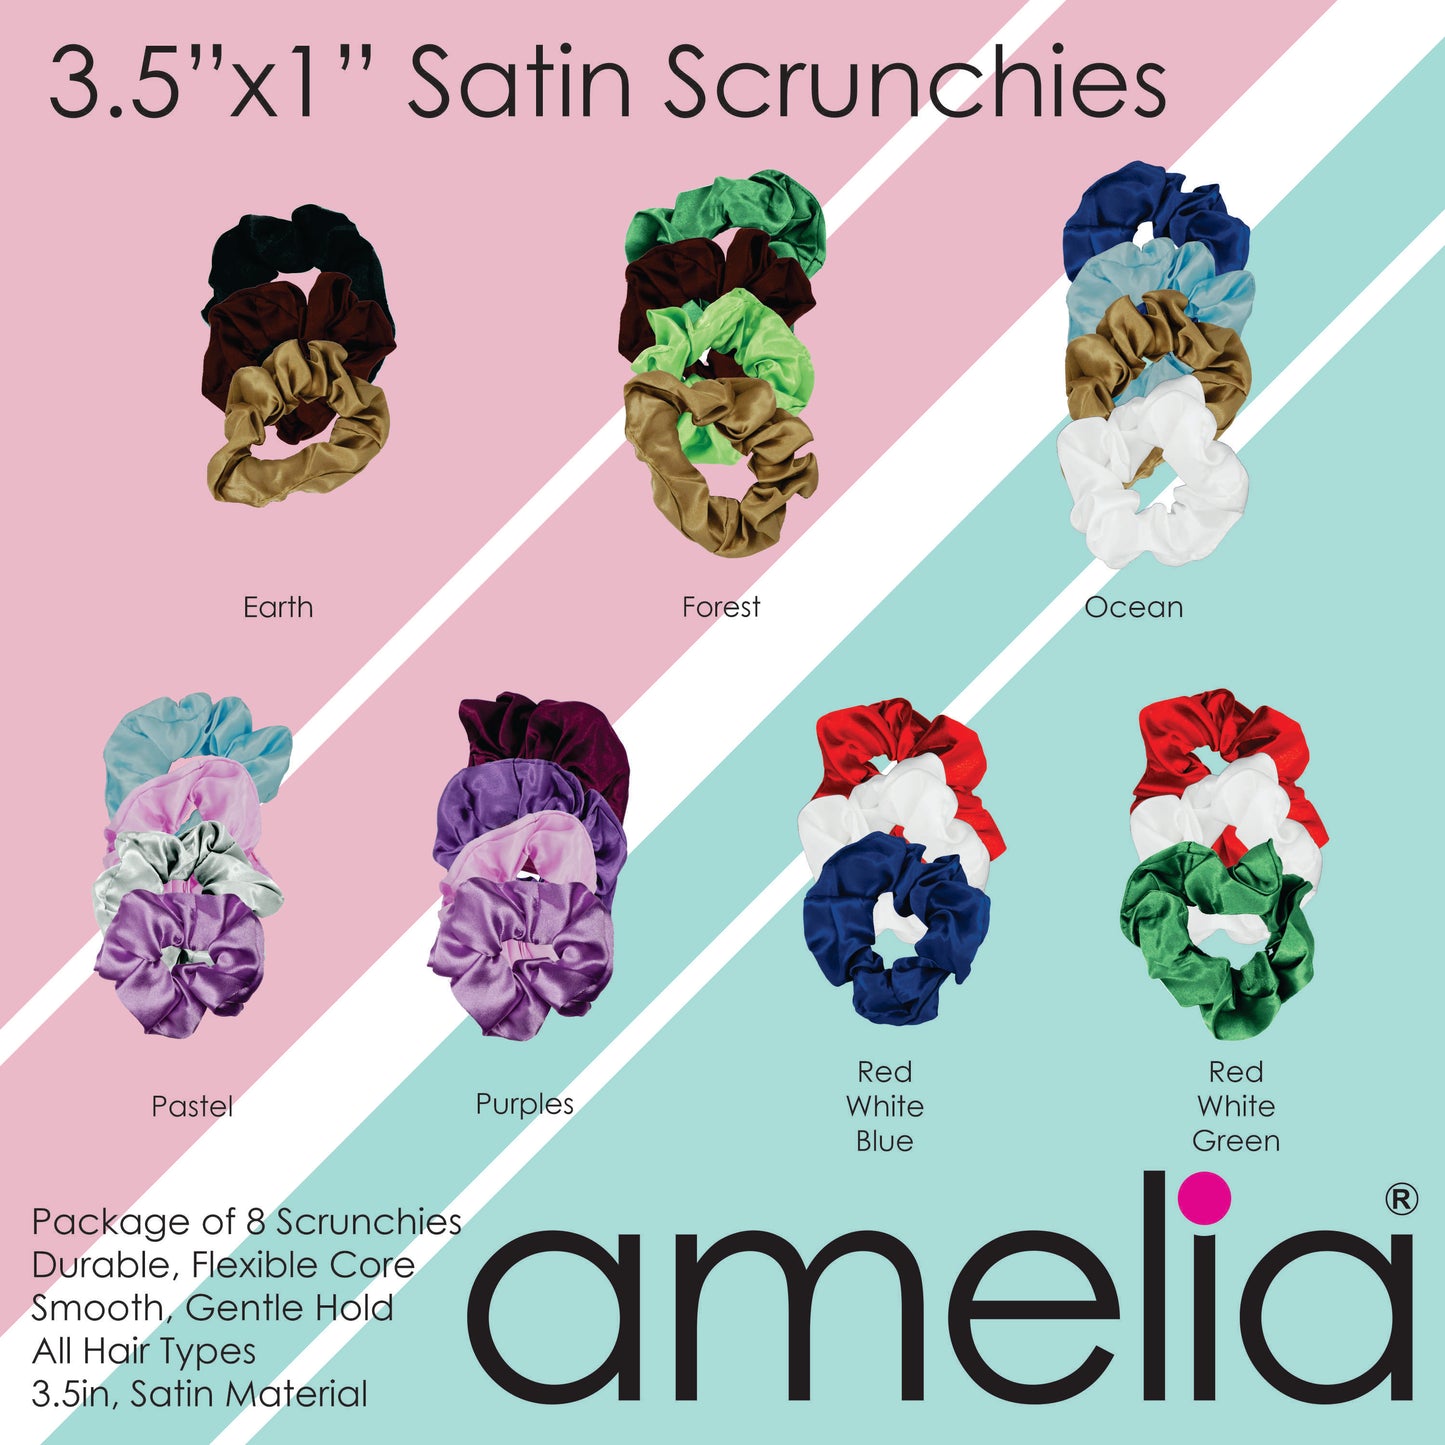 Amelia Beauty, Orange Imitation Silk Scrunchies, 4.5in Diameter, Gentle on Hair, Strong Hold, No Snag, No Dents or Creases. 6 Pack